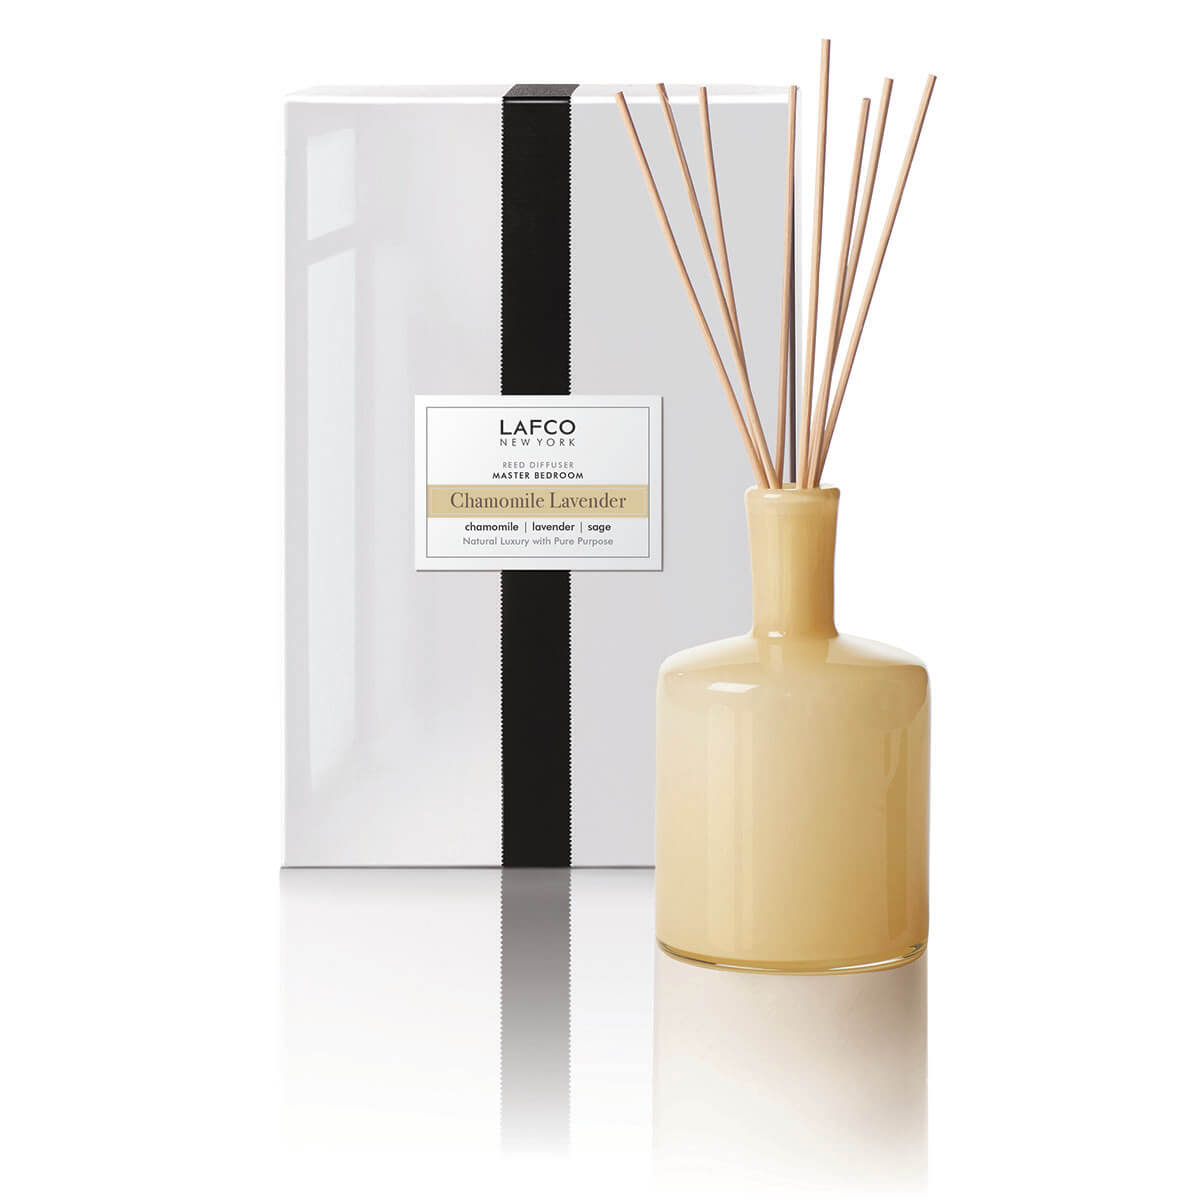 LAFCO Chamomile Lavender Reed Diffuser - Master Bedroom